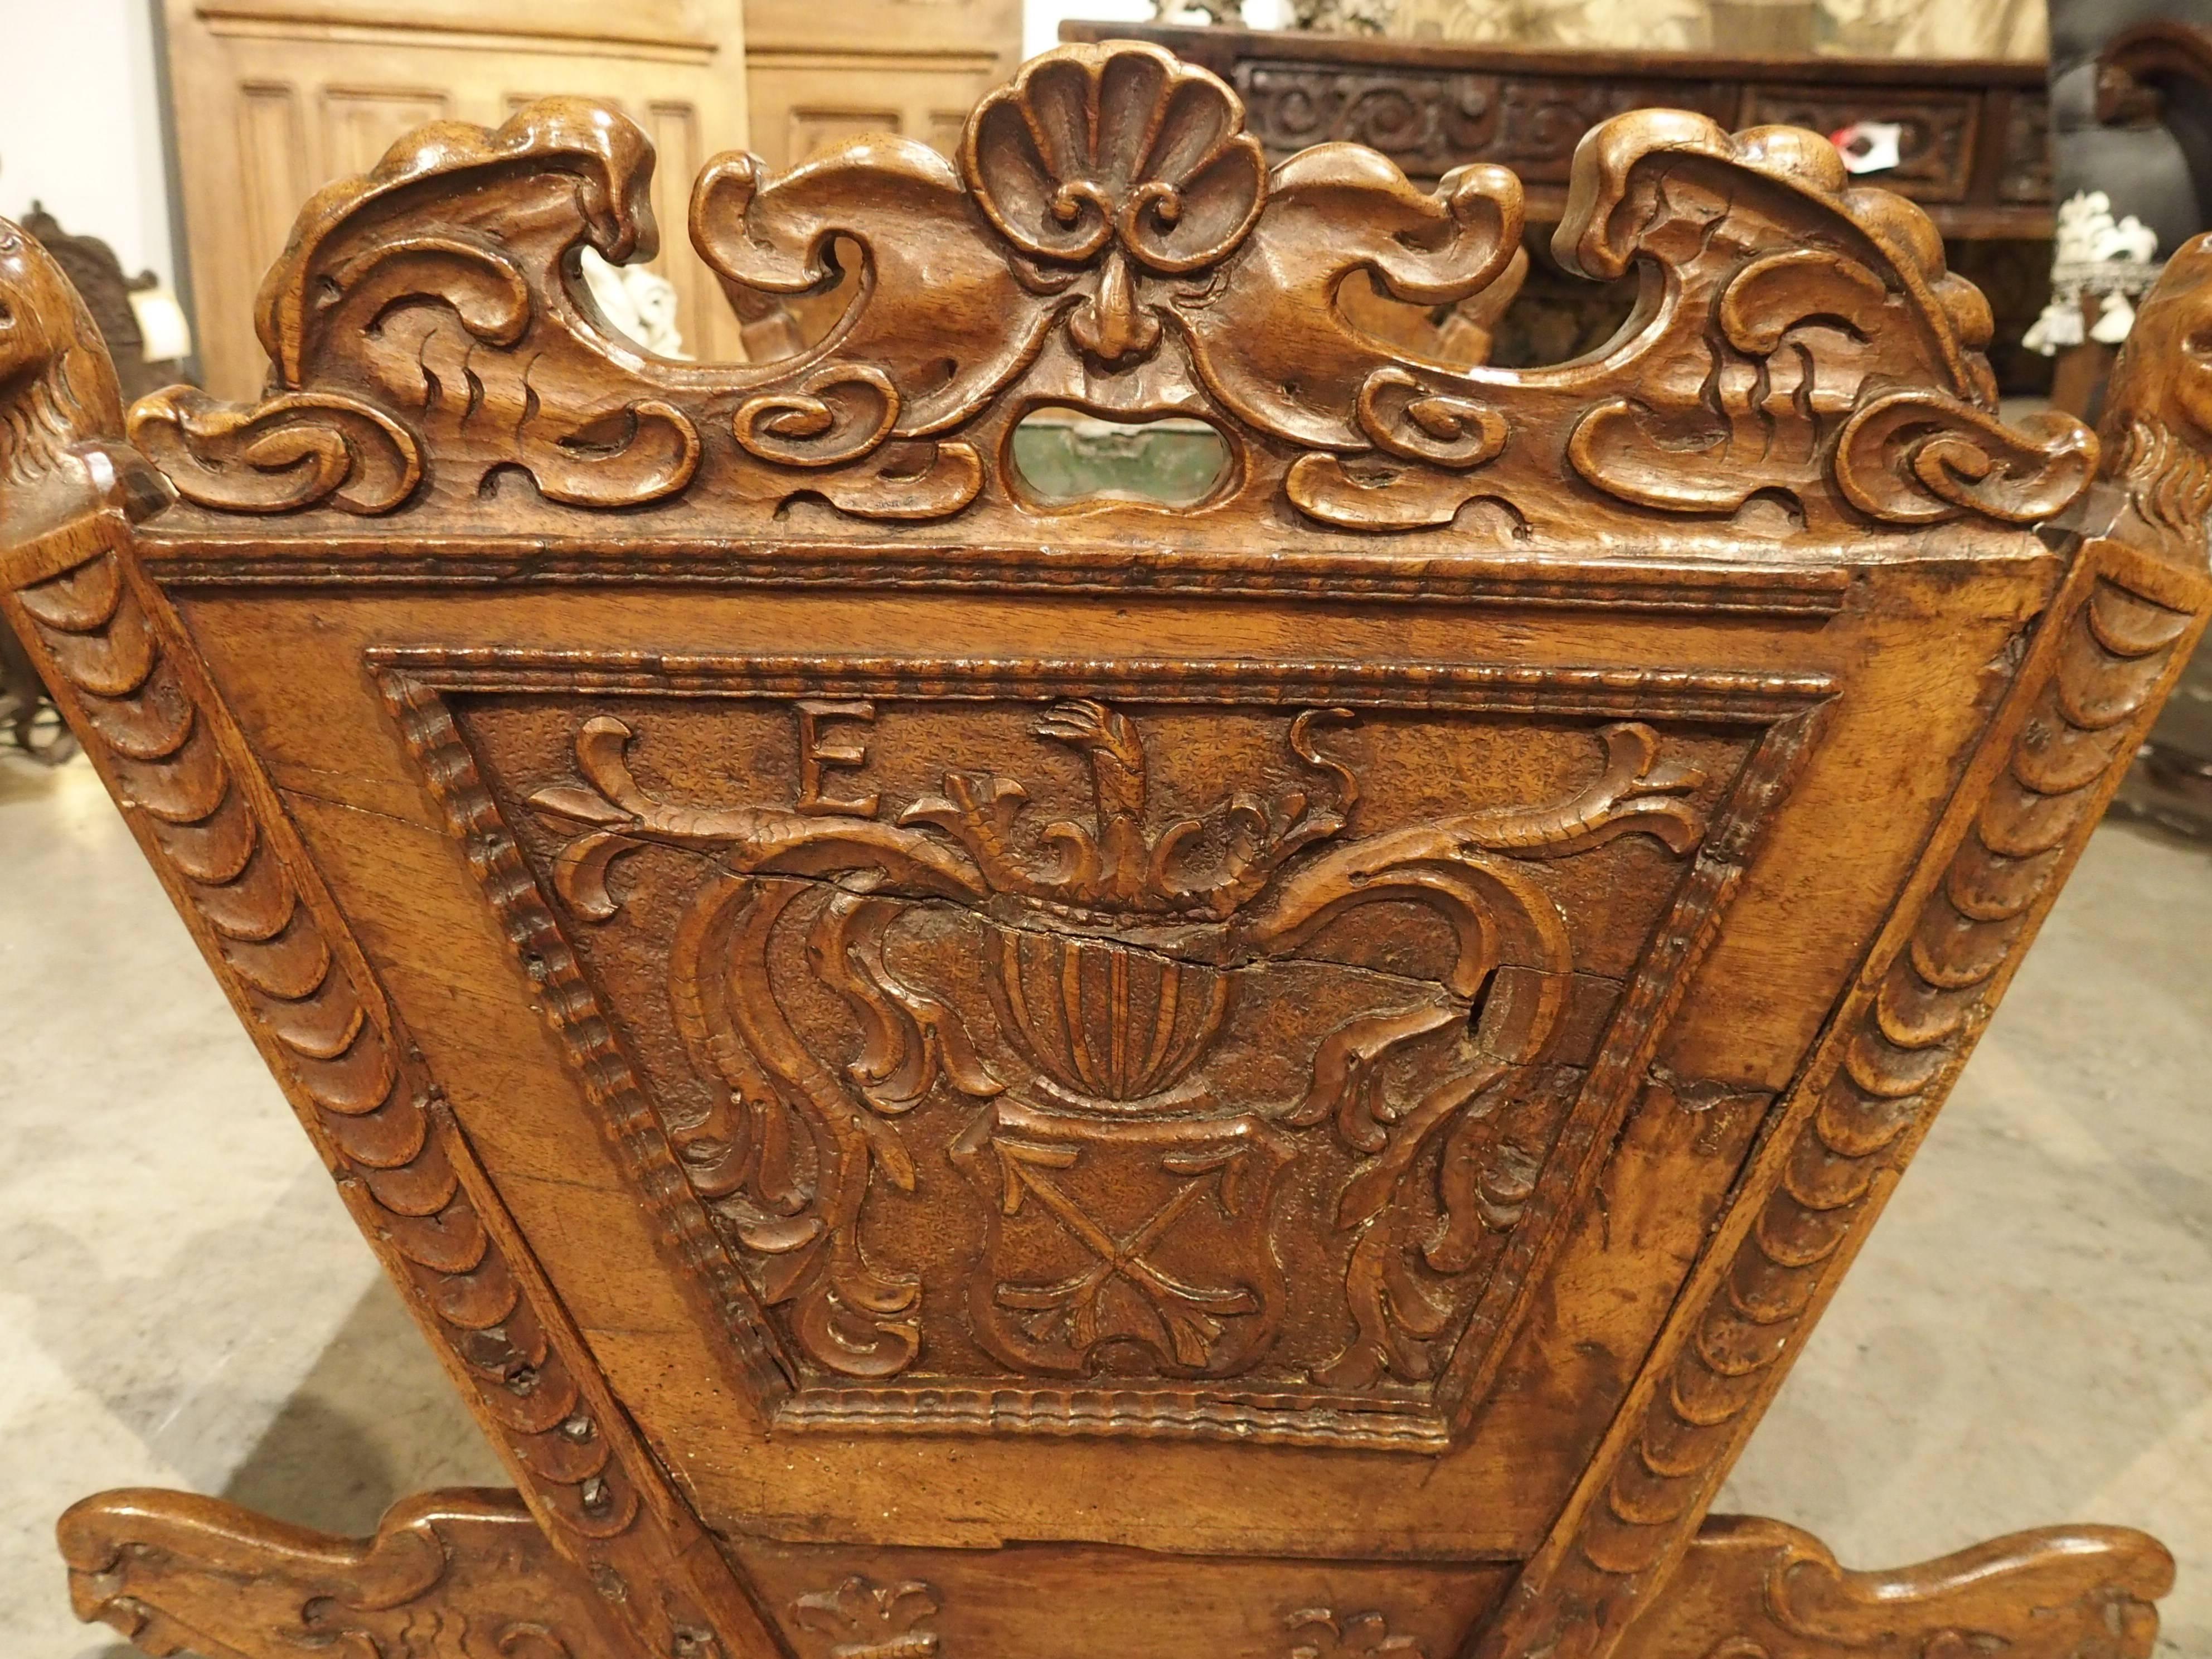 Tin liner added in the 1800s or later to convert to a planter.

This wonderful 18th century French crib from the Bourgogne area has been converted into a planter sometime in the 19th century. It would have been originally carved during the 1700s,